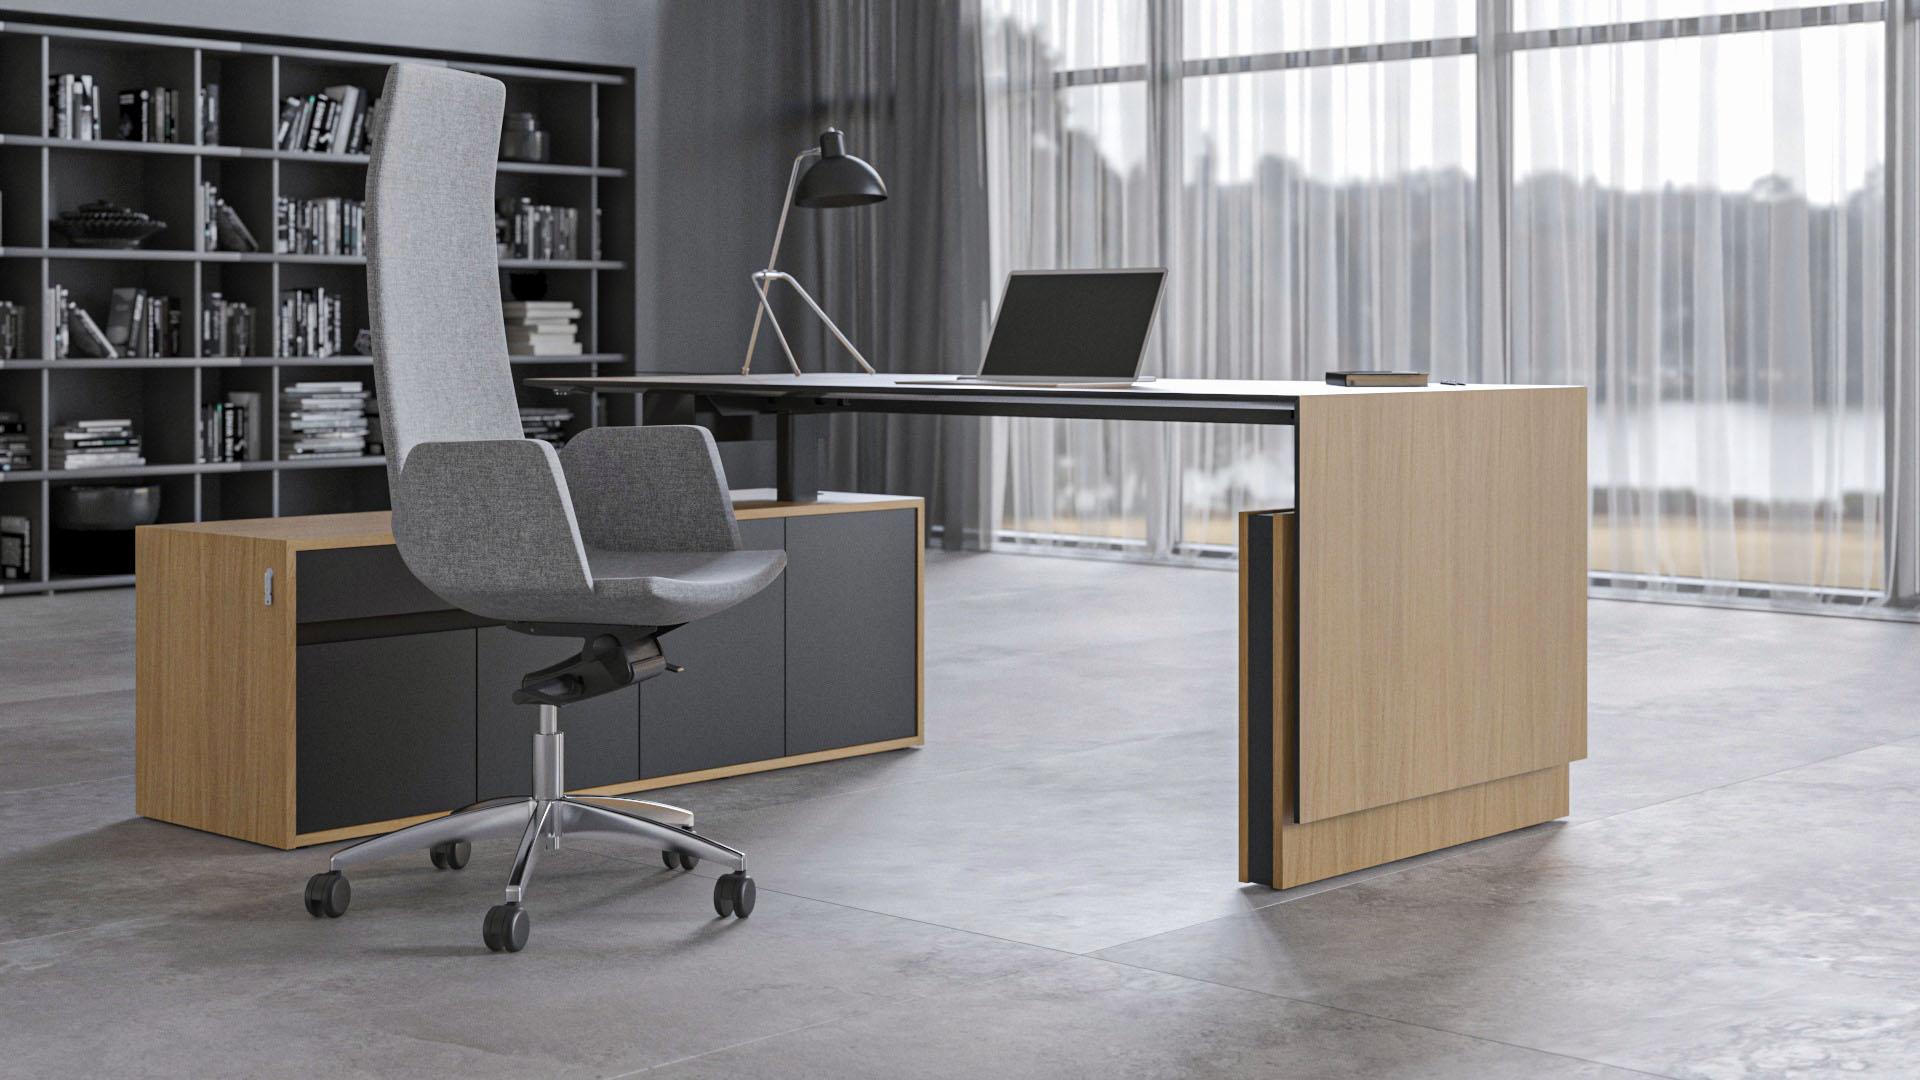 Motion Executive height adjustable desks combine modern elegance and thoughtful functionality